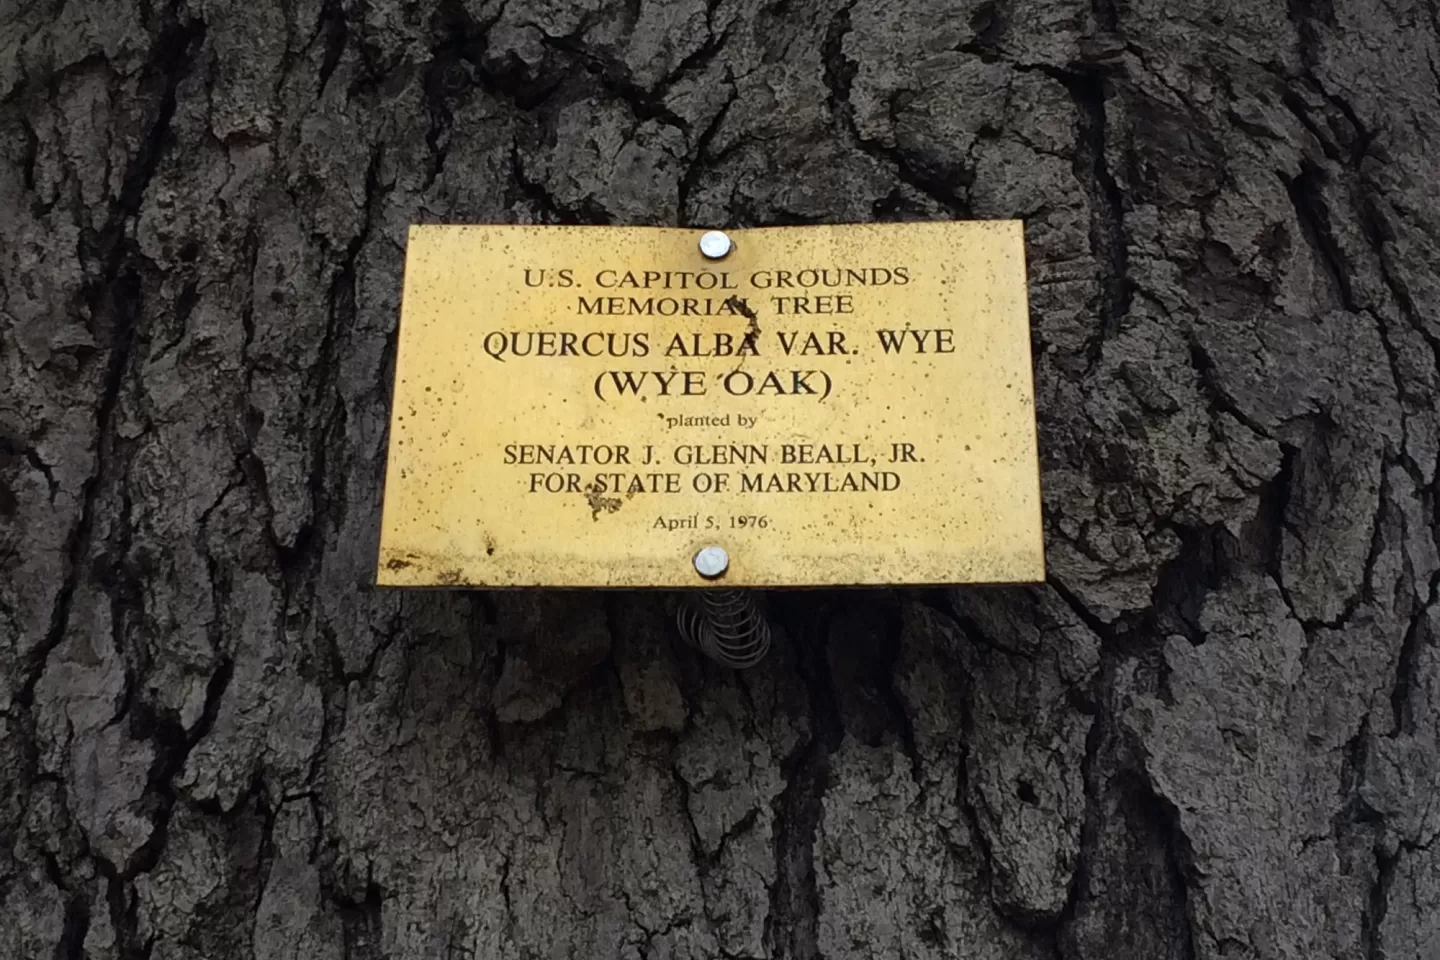 Plaque that reads: U.S. Capitol Grounds  Memorial Tree    Quercus alba var. wye  (Wye Oak)   planted by   Senator J. Glenn Beall, Jr.  For State of Maryland   April 5, 1976